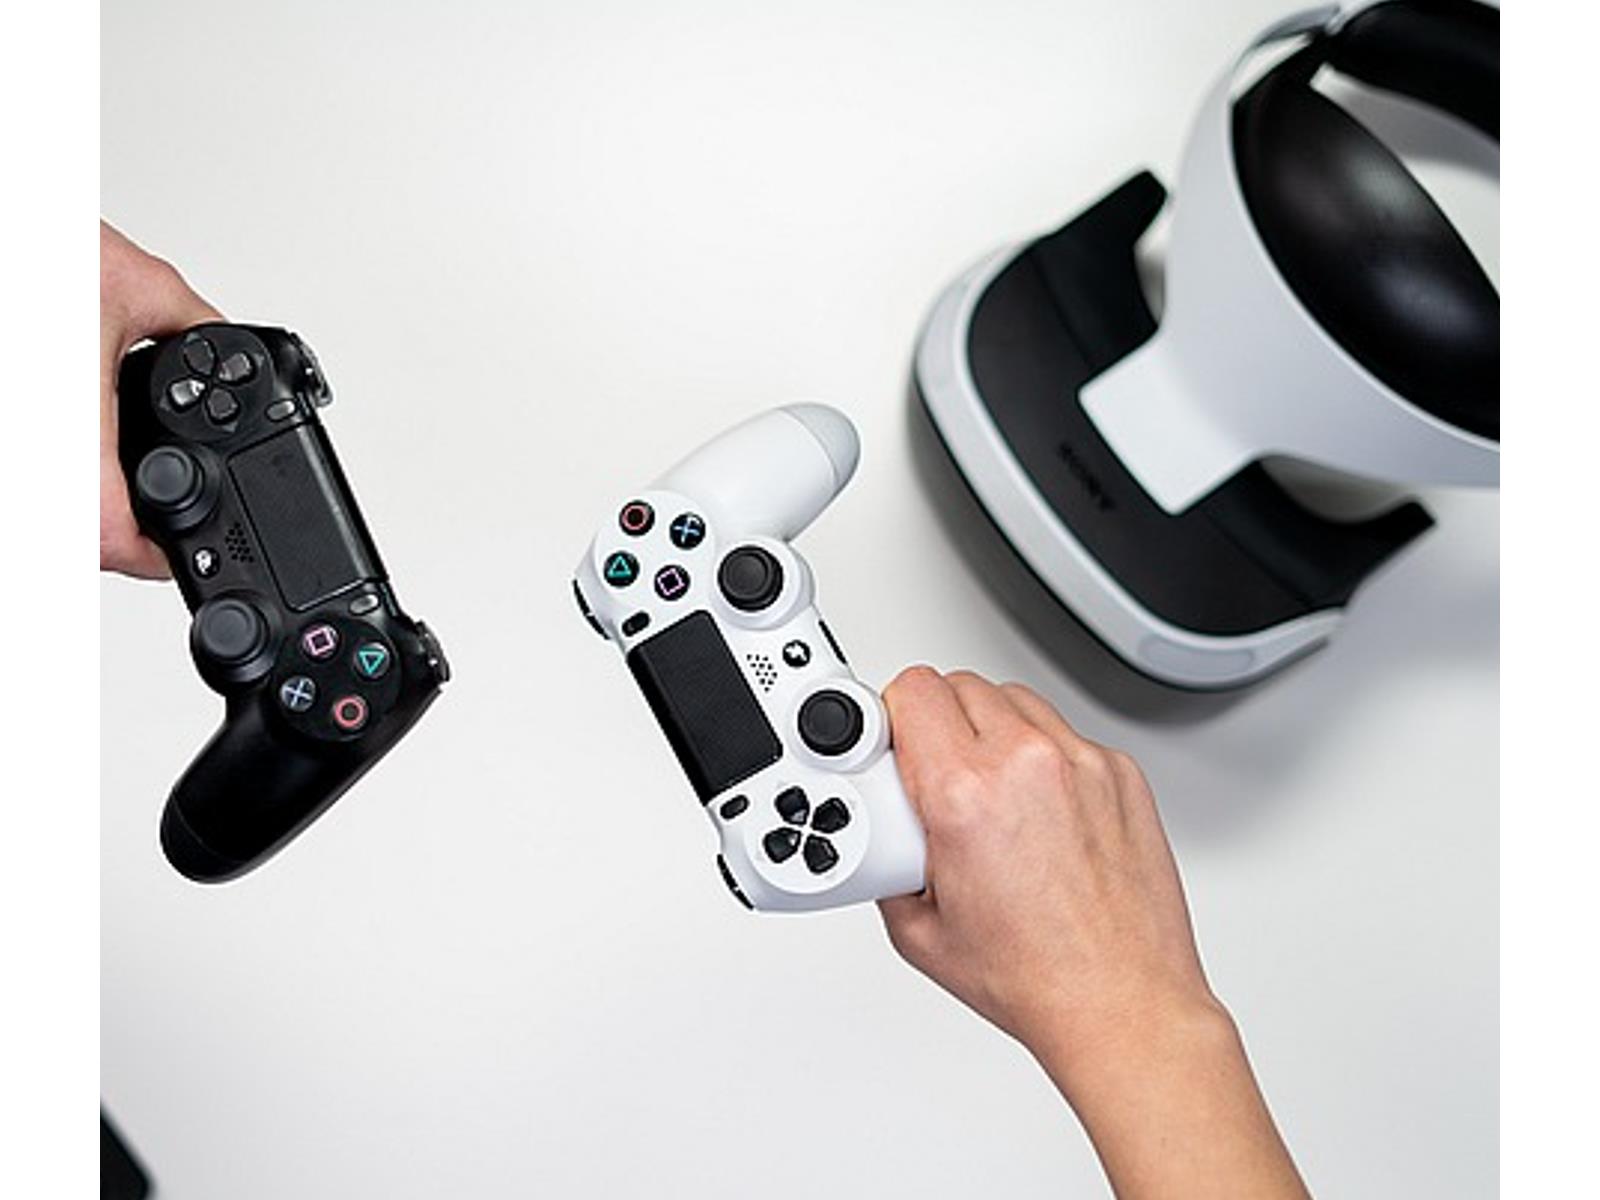 Forget the metaverse, Sony's PlayStation VR2 will make you a